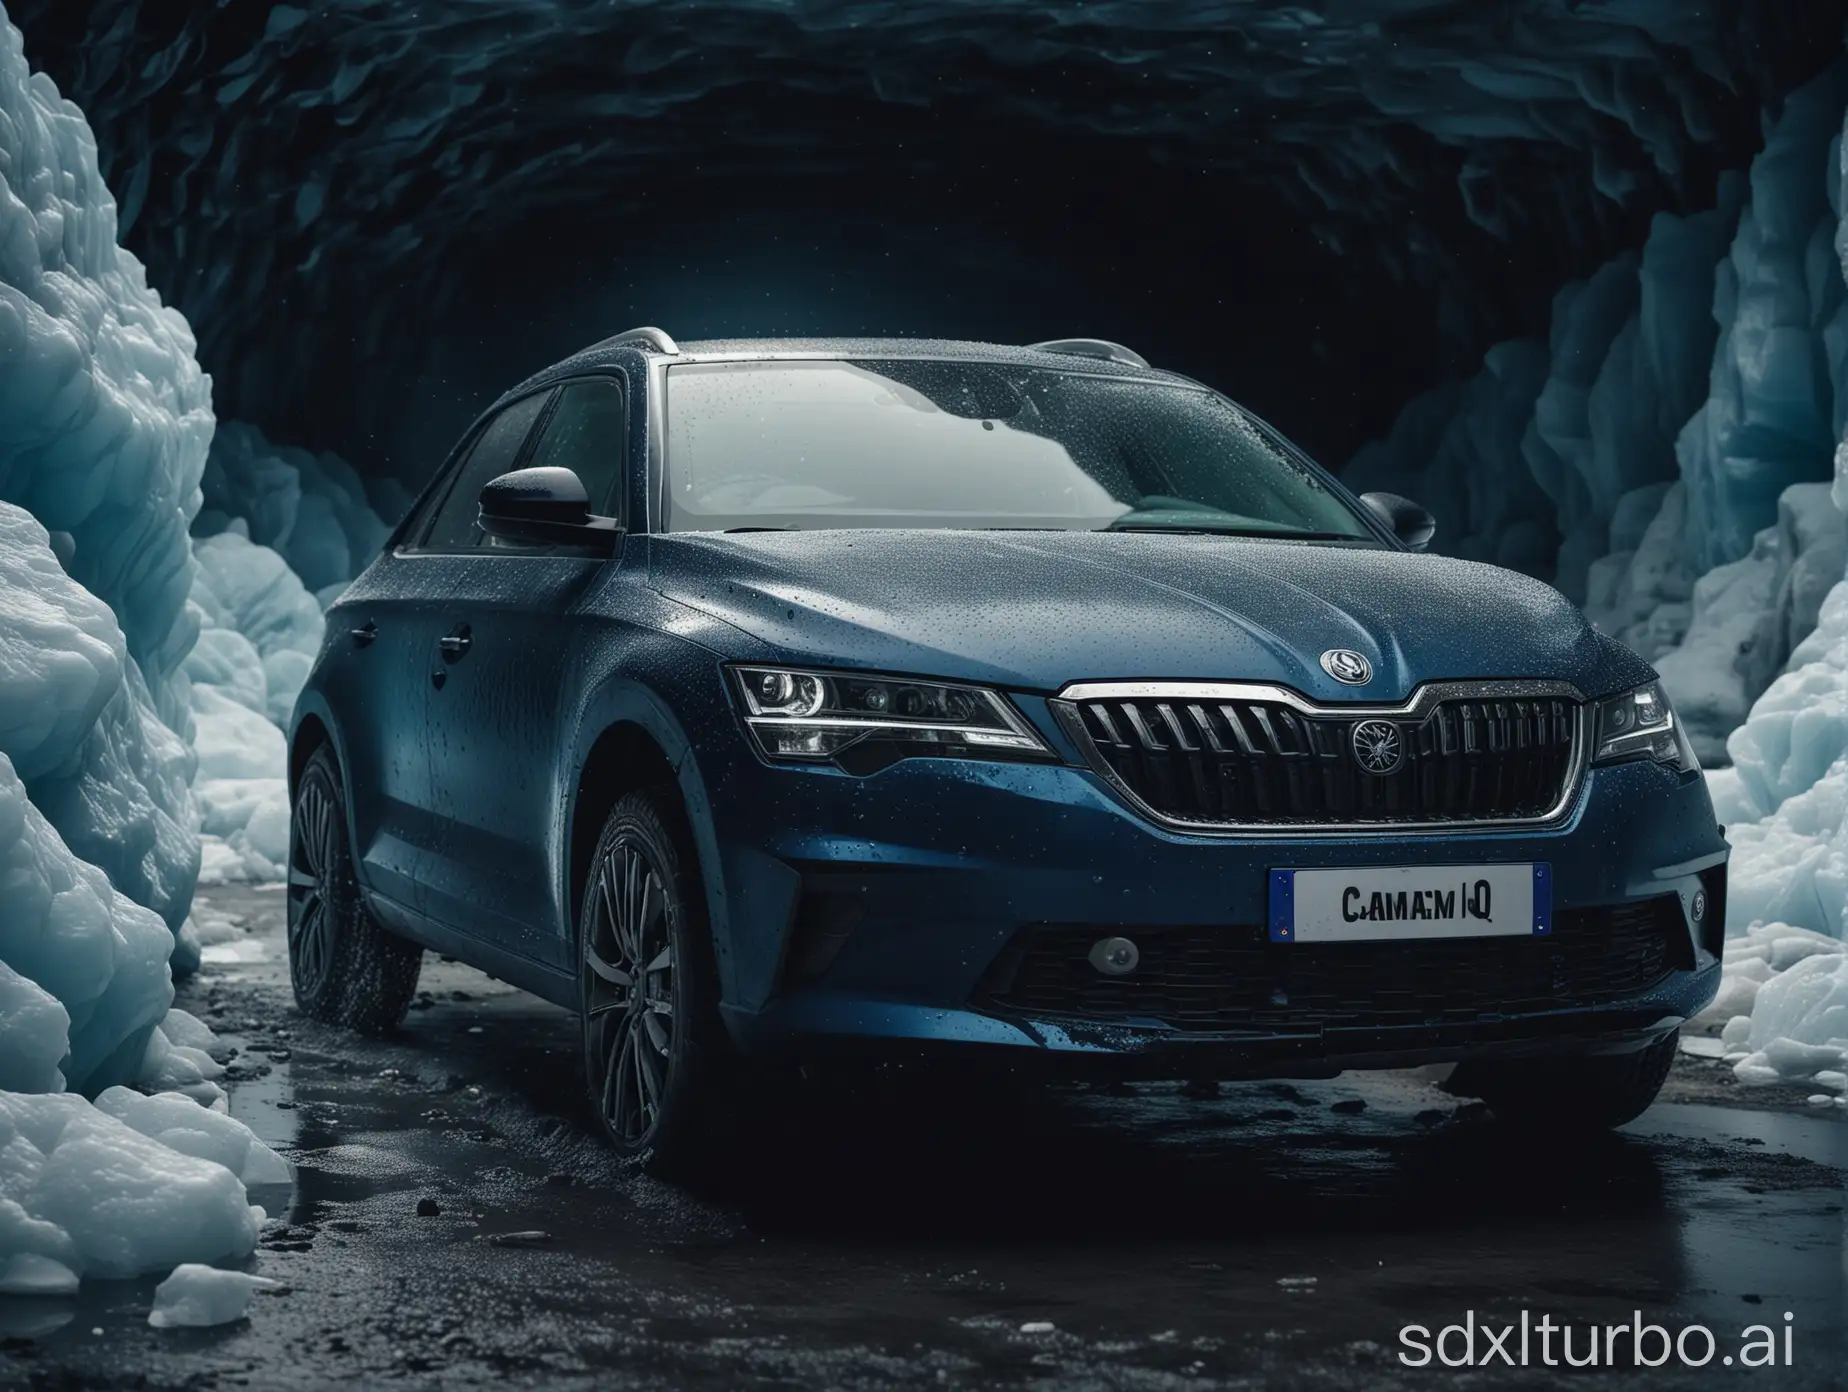 professional front portrait photo of Skoda Camiq car driving in a dark blue glacial ice cave. Matte navy blue paint. Offroad bumper. Bokeh.